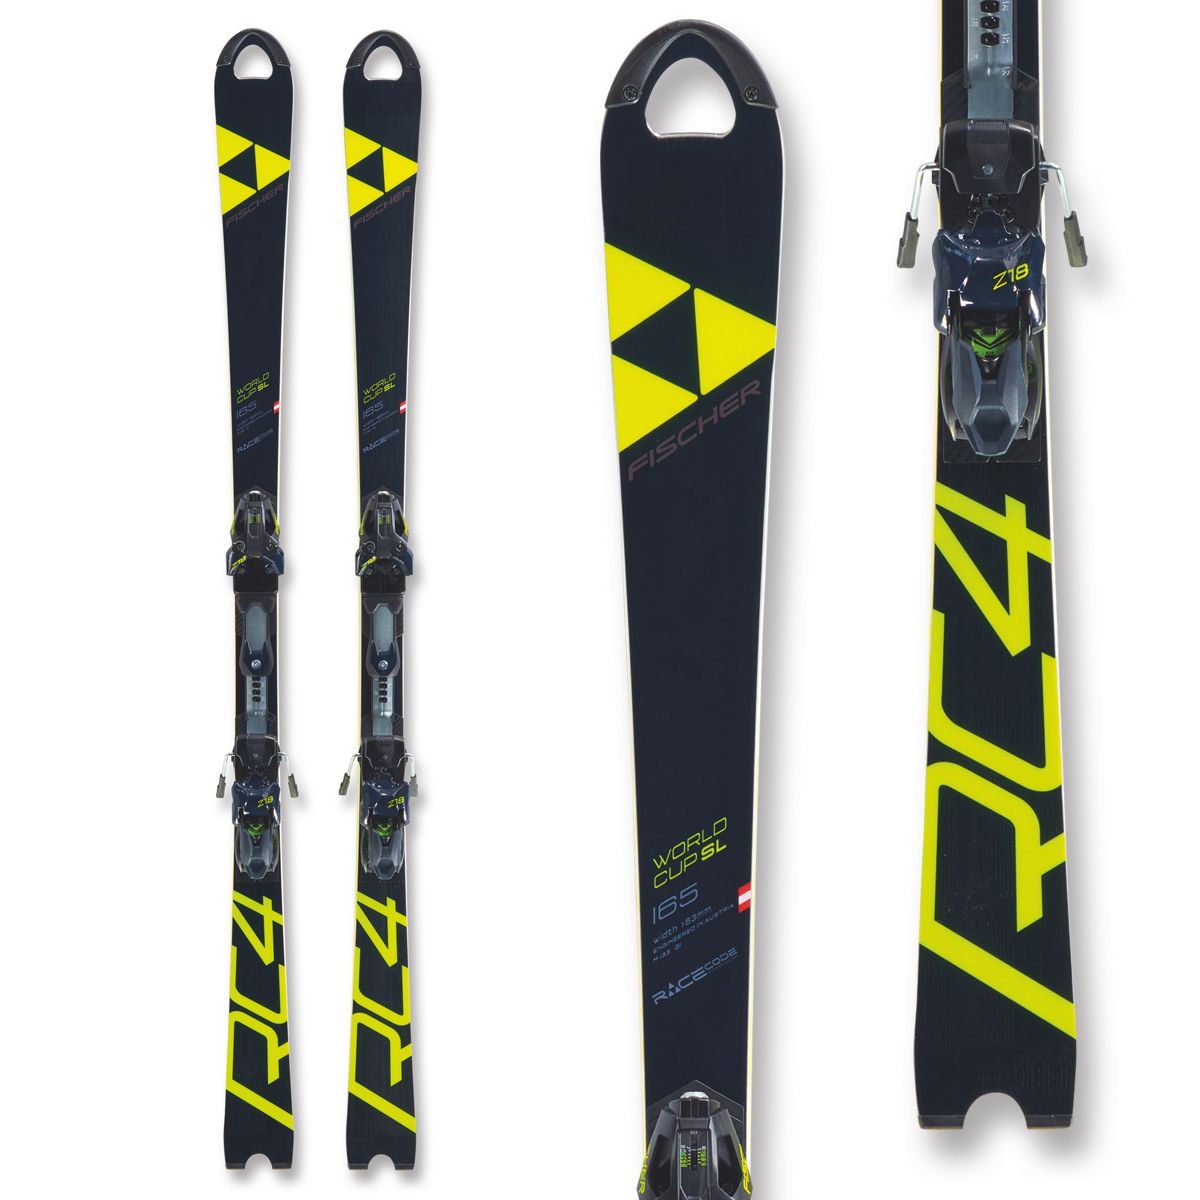 Pack Skis RC4 WORLDCUP SL women CURV BOOSTER + Fix Z13